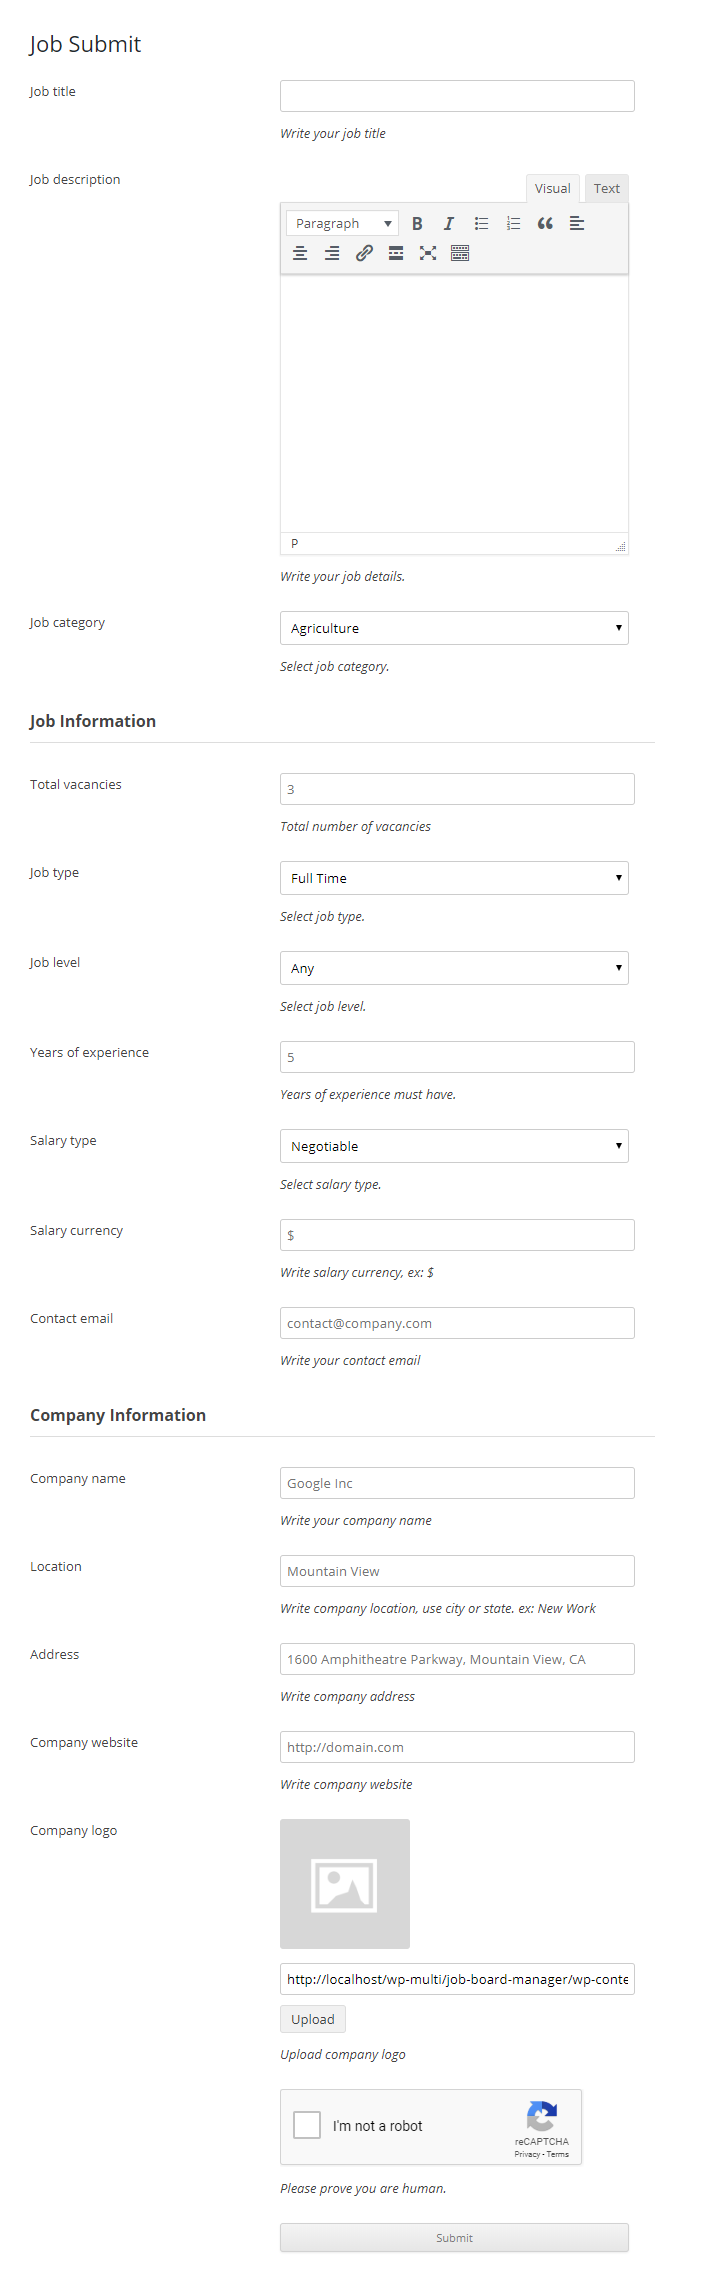 Job Submit Form